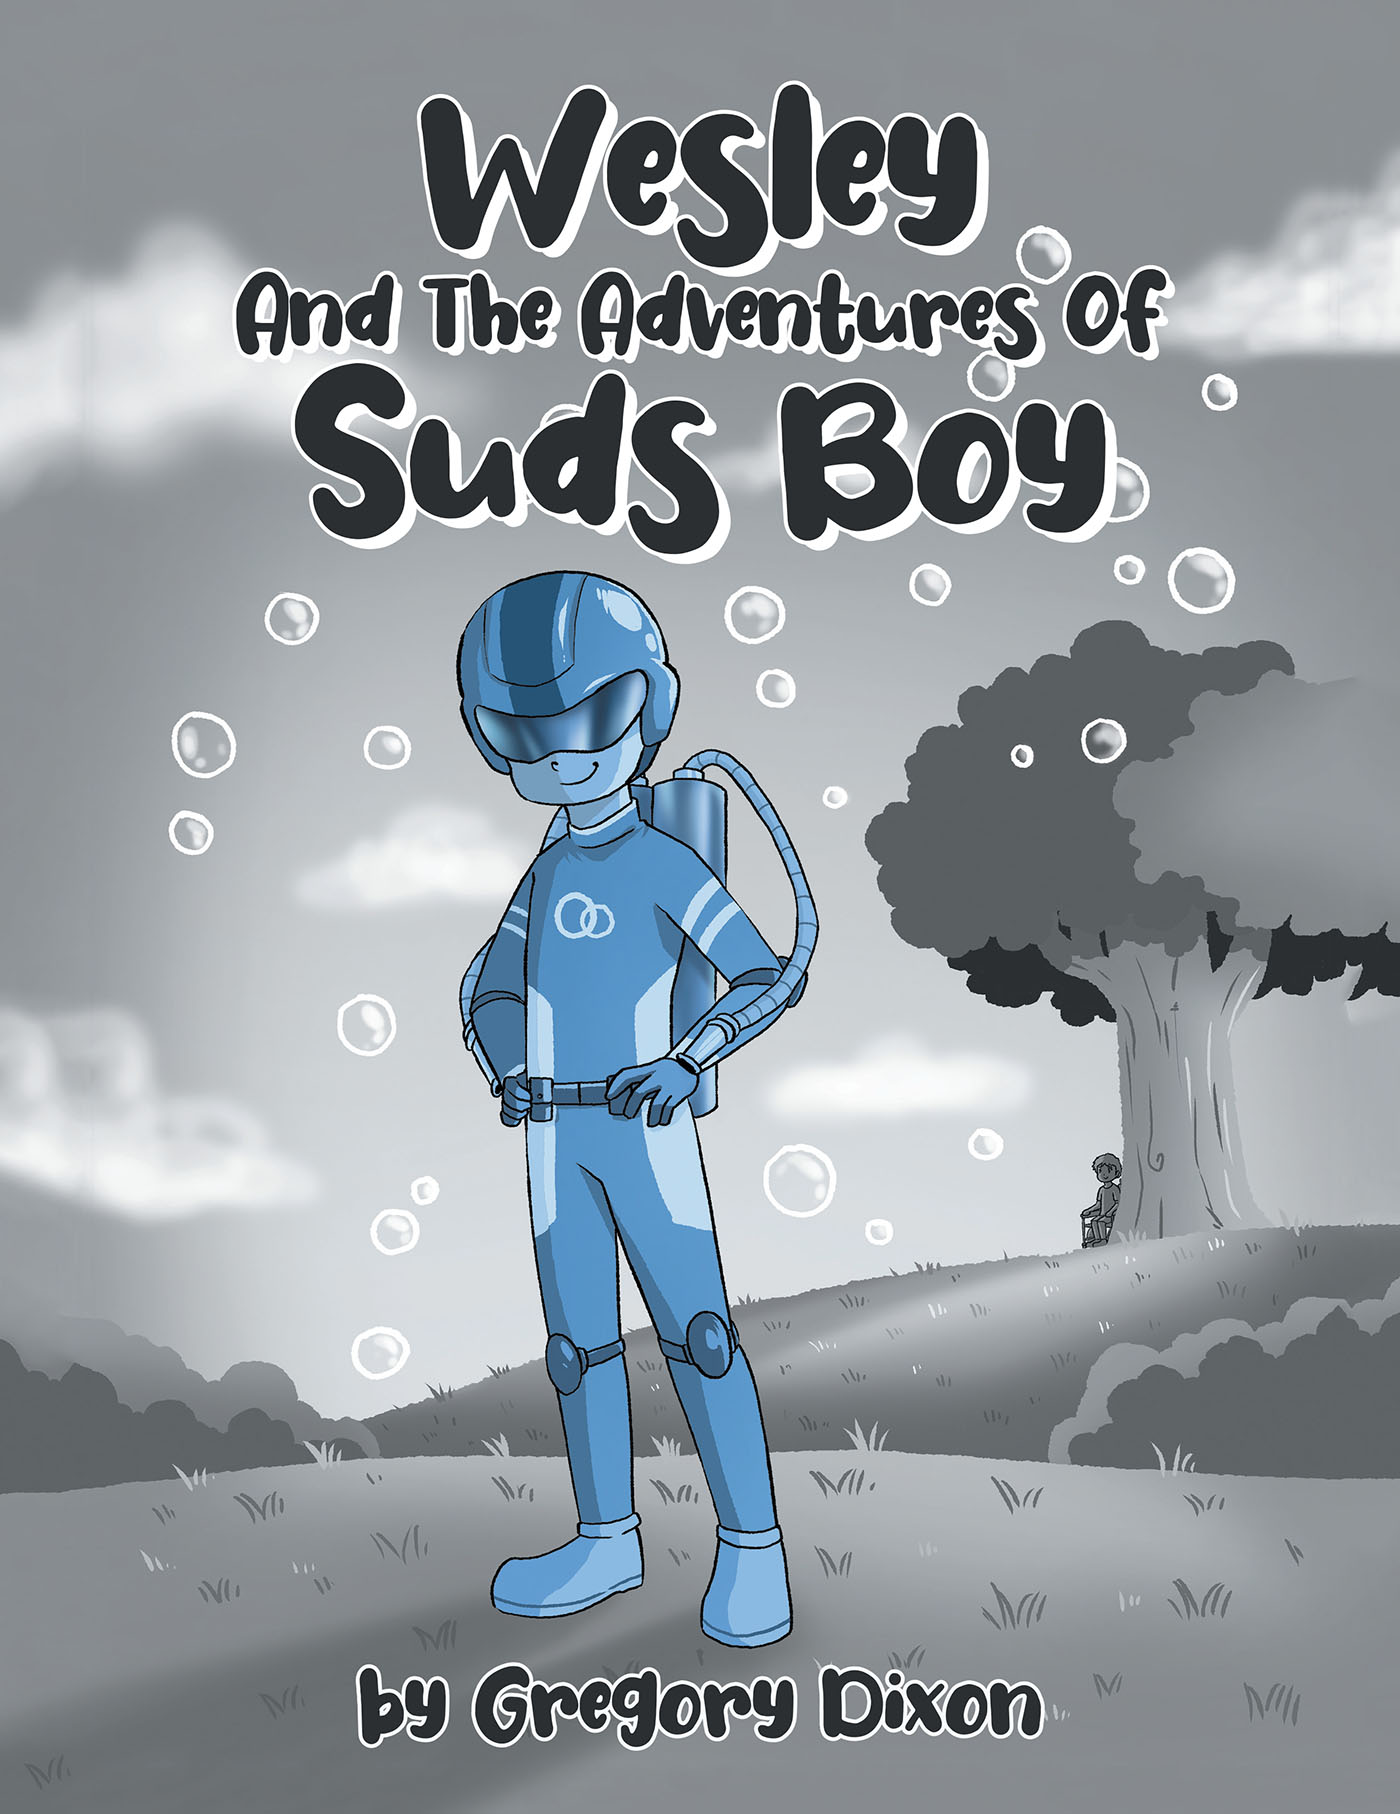 Gregory Dixon’s Newly Released “Wesley And The Adventures Of Suds Boy” is an Imaginative Adventure of Good Versus Evil